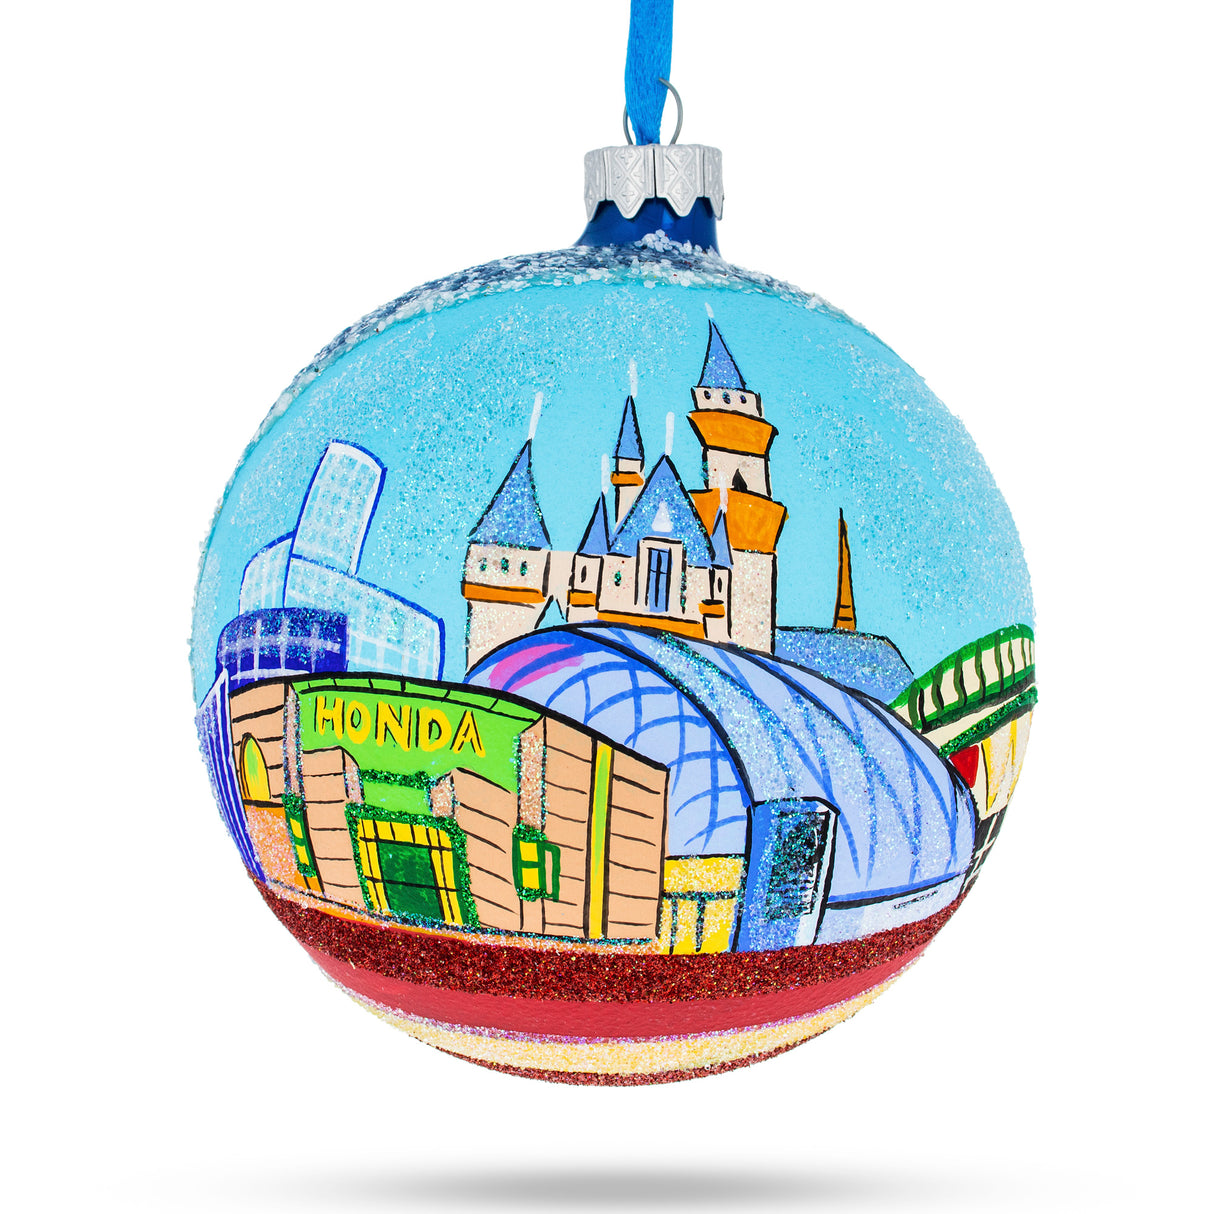 Anaheim, Maryland Glass Ball Christmas Ornament 4 Inches in Multi color, Round shape